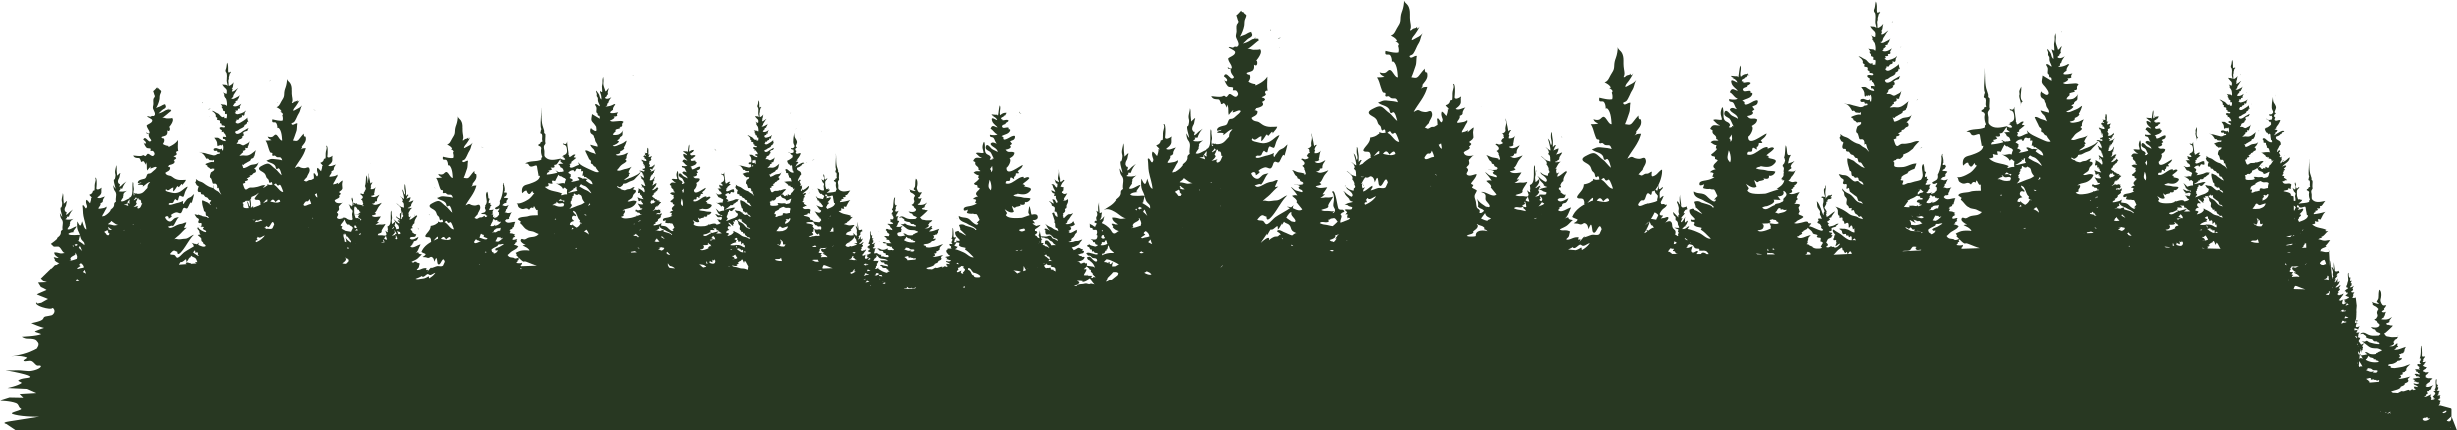 forest clipart forest ecosystem